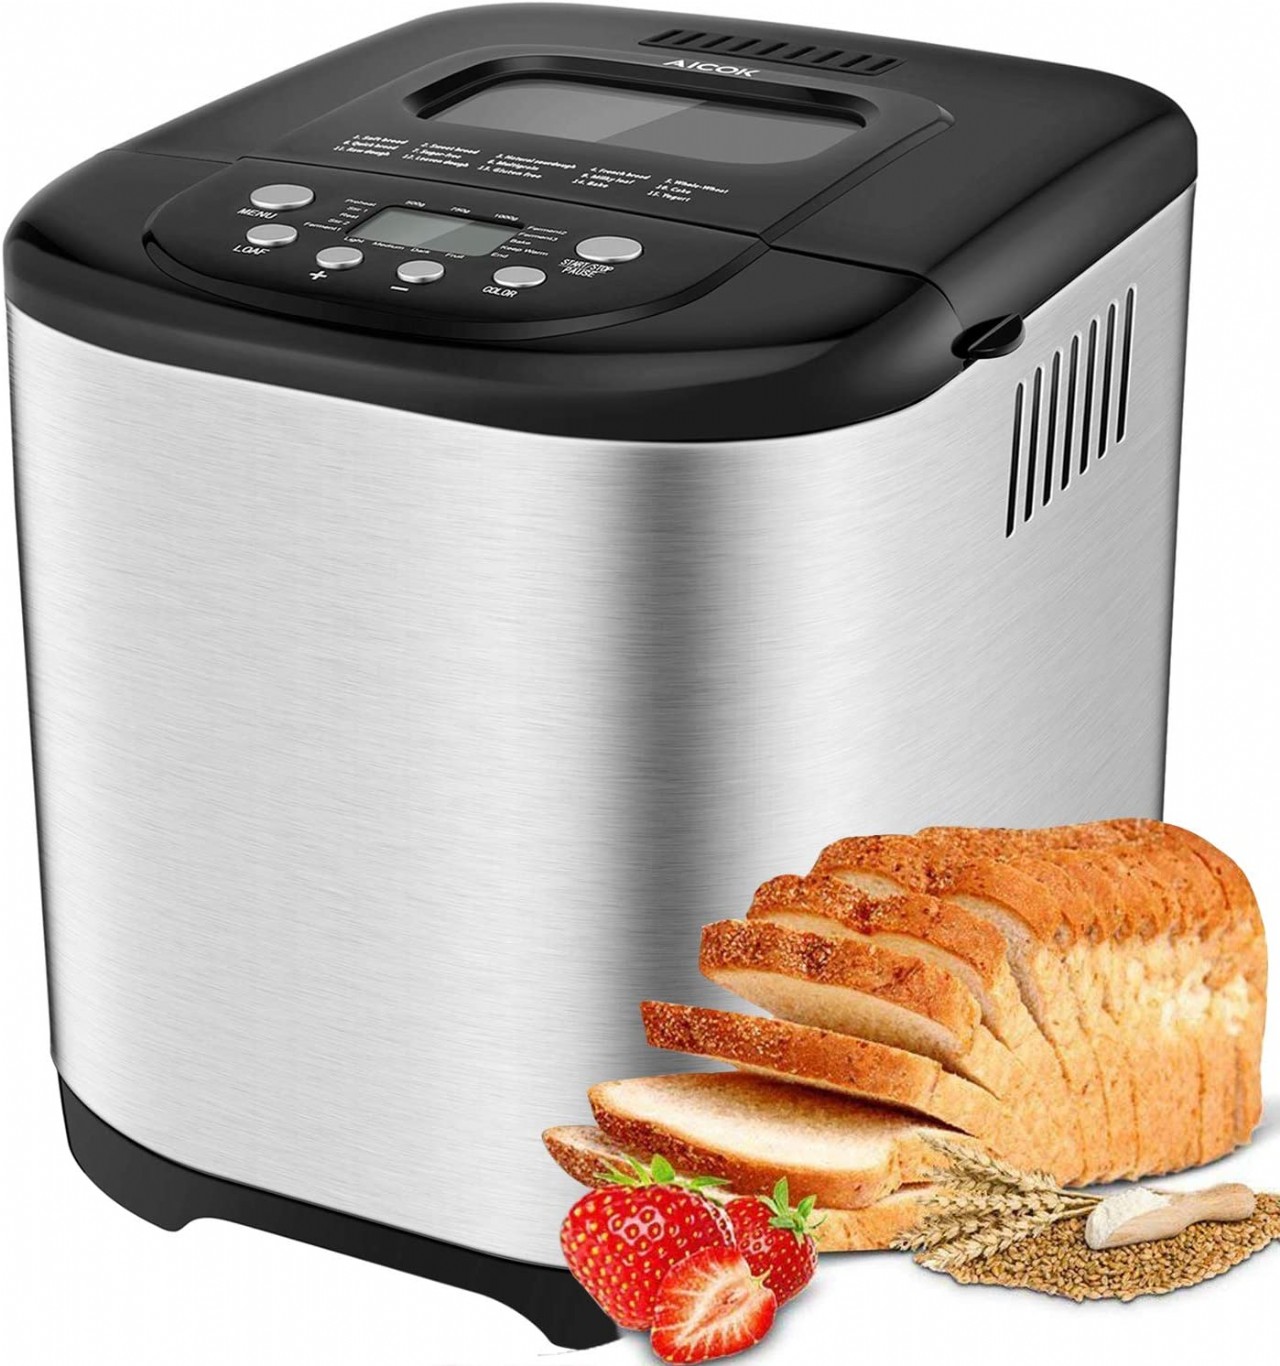 Aicok Automatic Bread Maker, 2LB Programmable Bread Machine With LED Display, Visual Menu